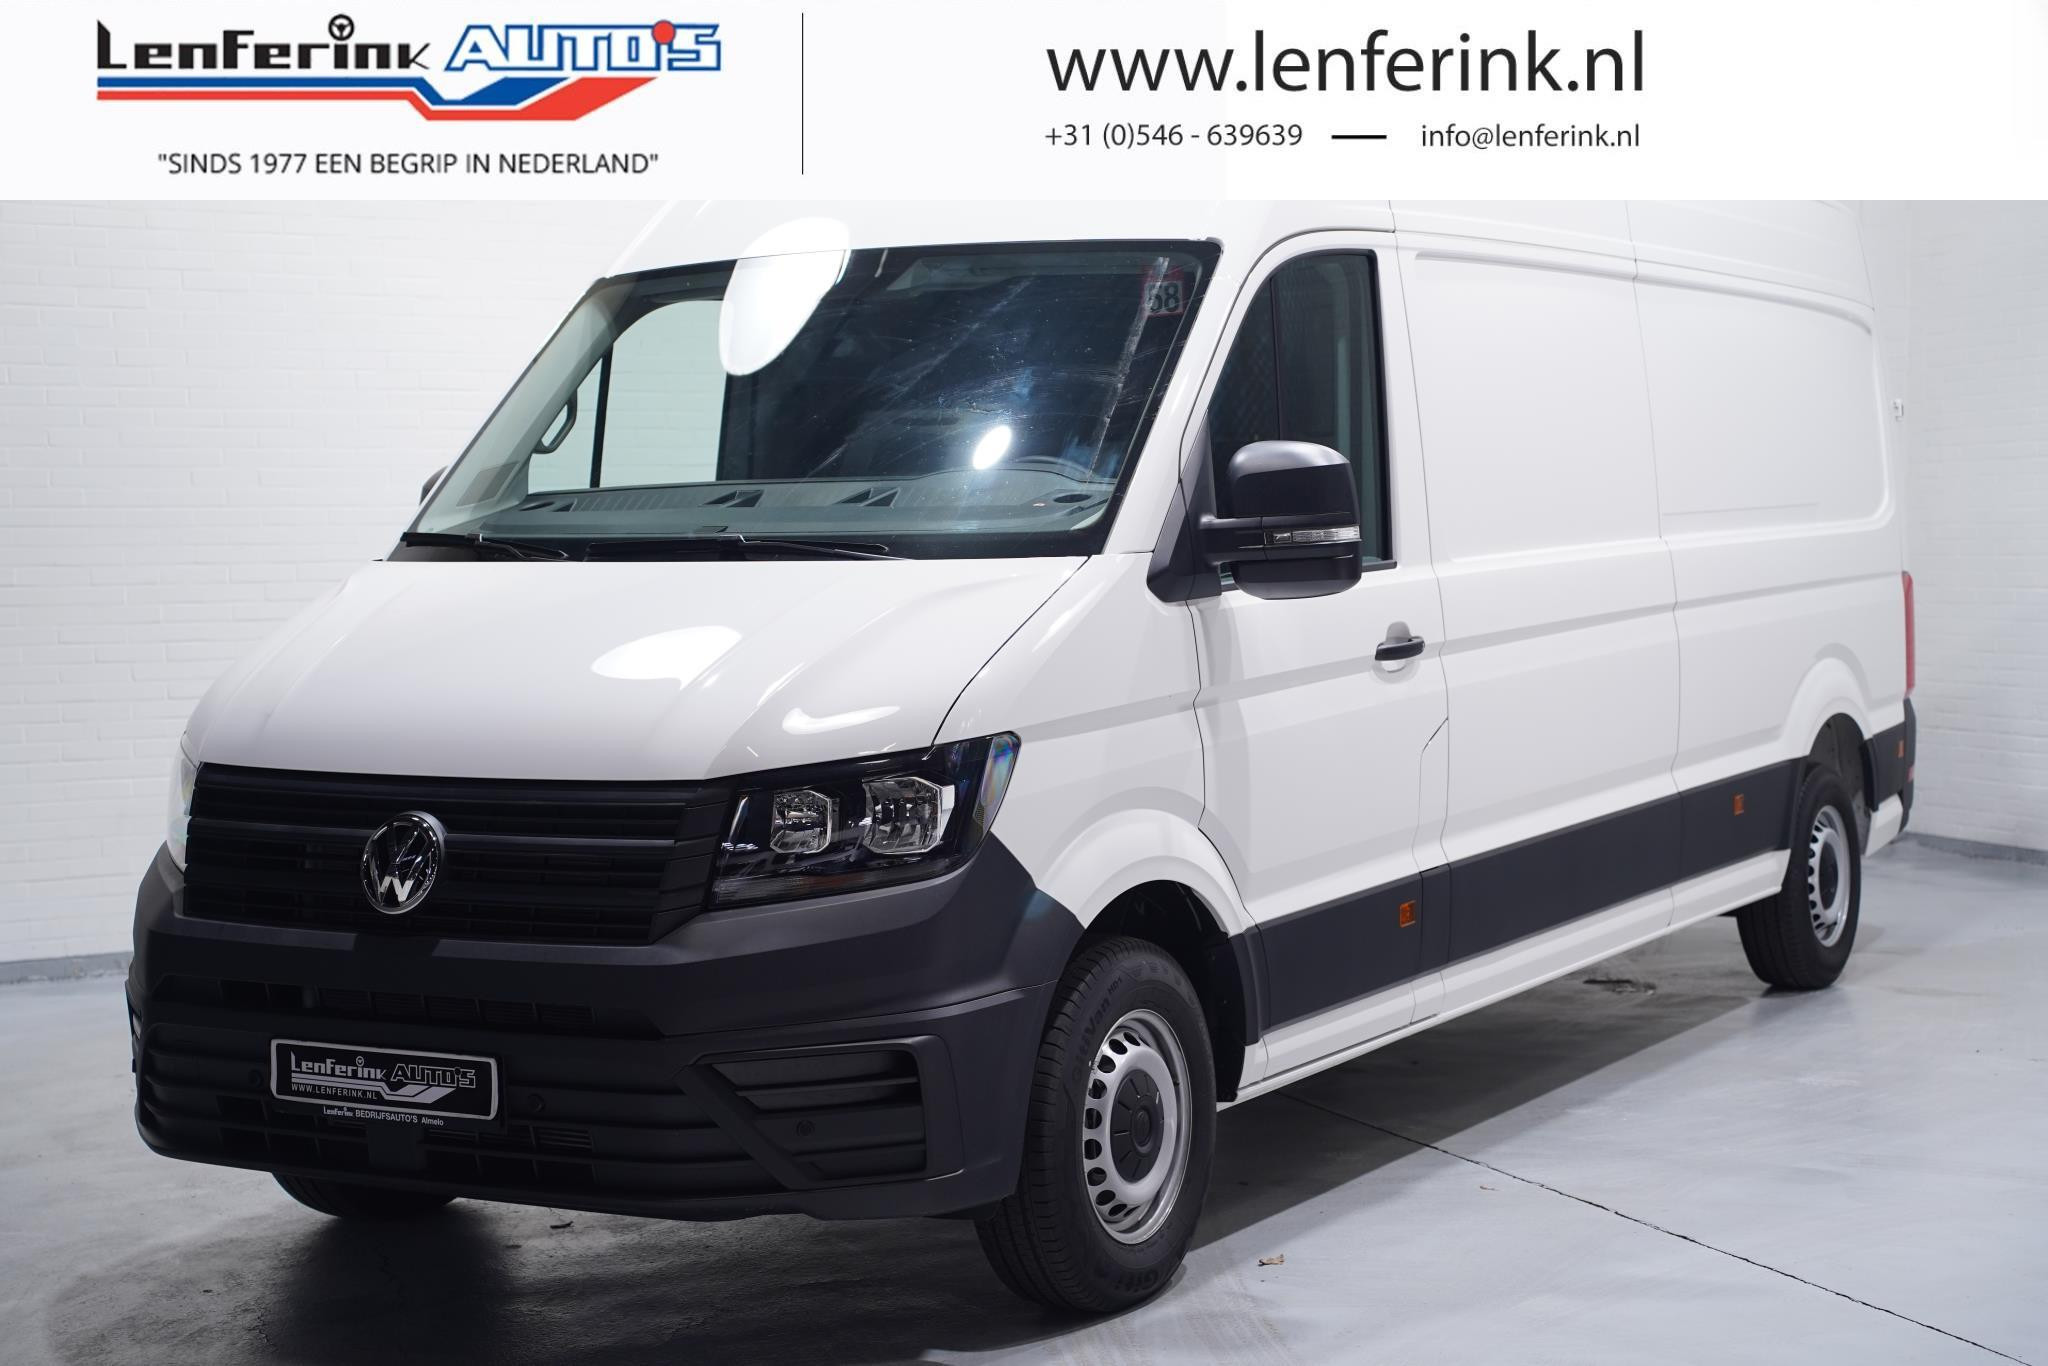 Volkswagen Crafter 2.0 TDI 140 pk L4H3 DSG Automaat Airco, PDC V+A Cruise Control, Bluetooth, 3-Zits, Nieuw